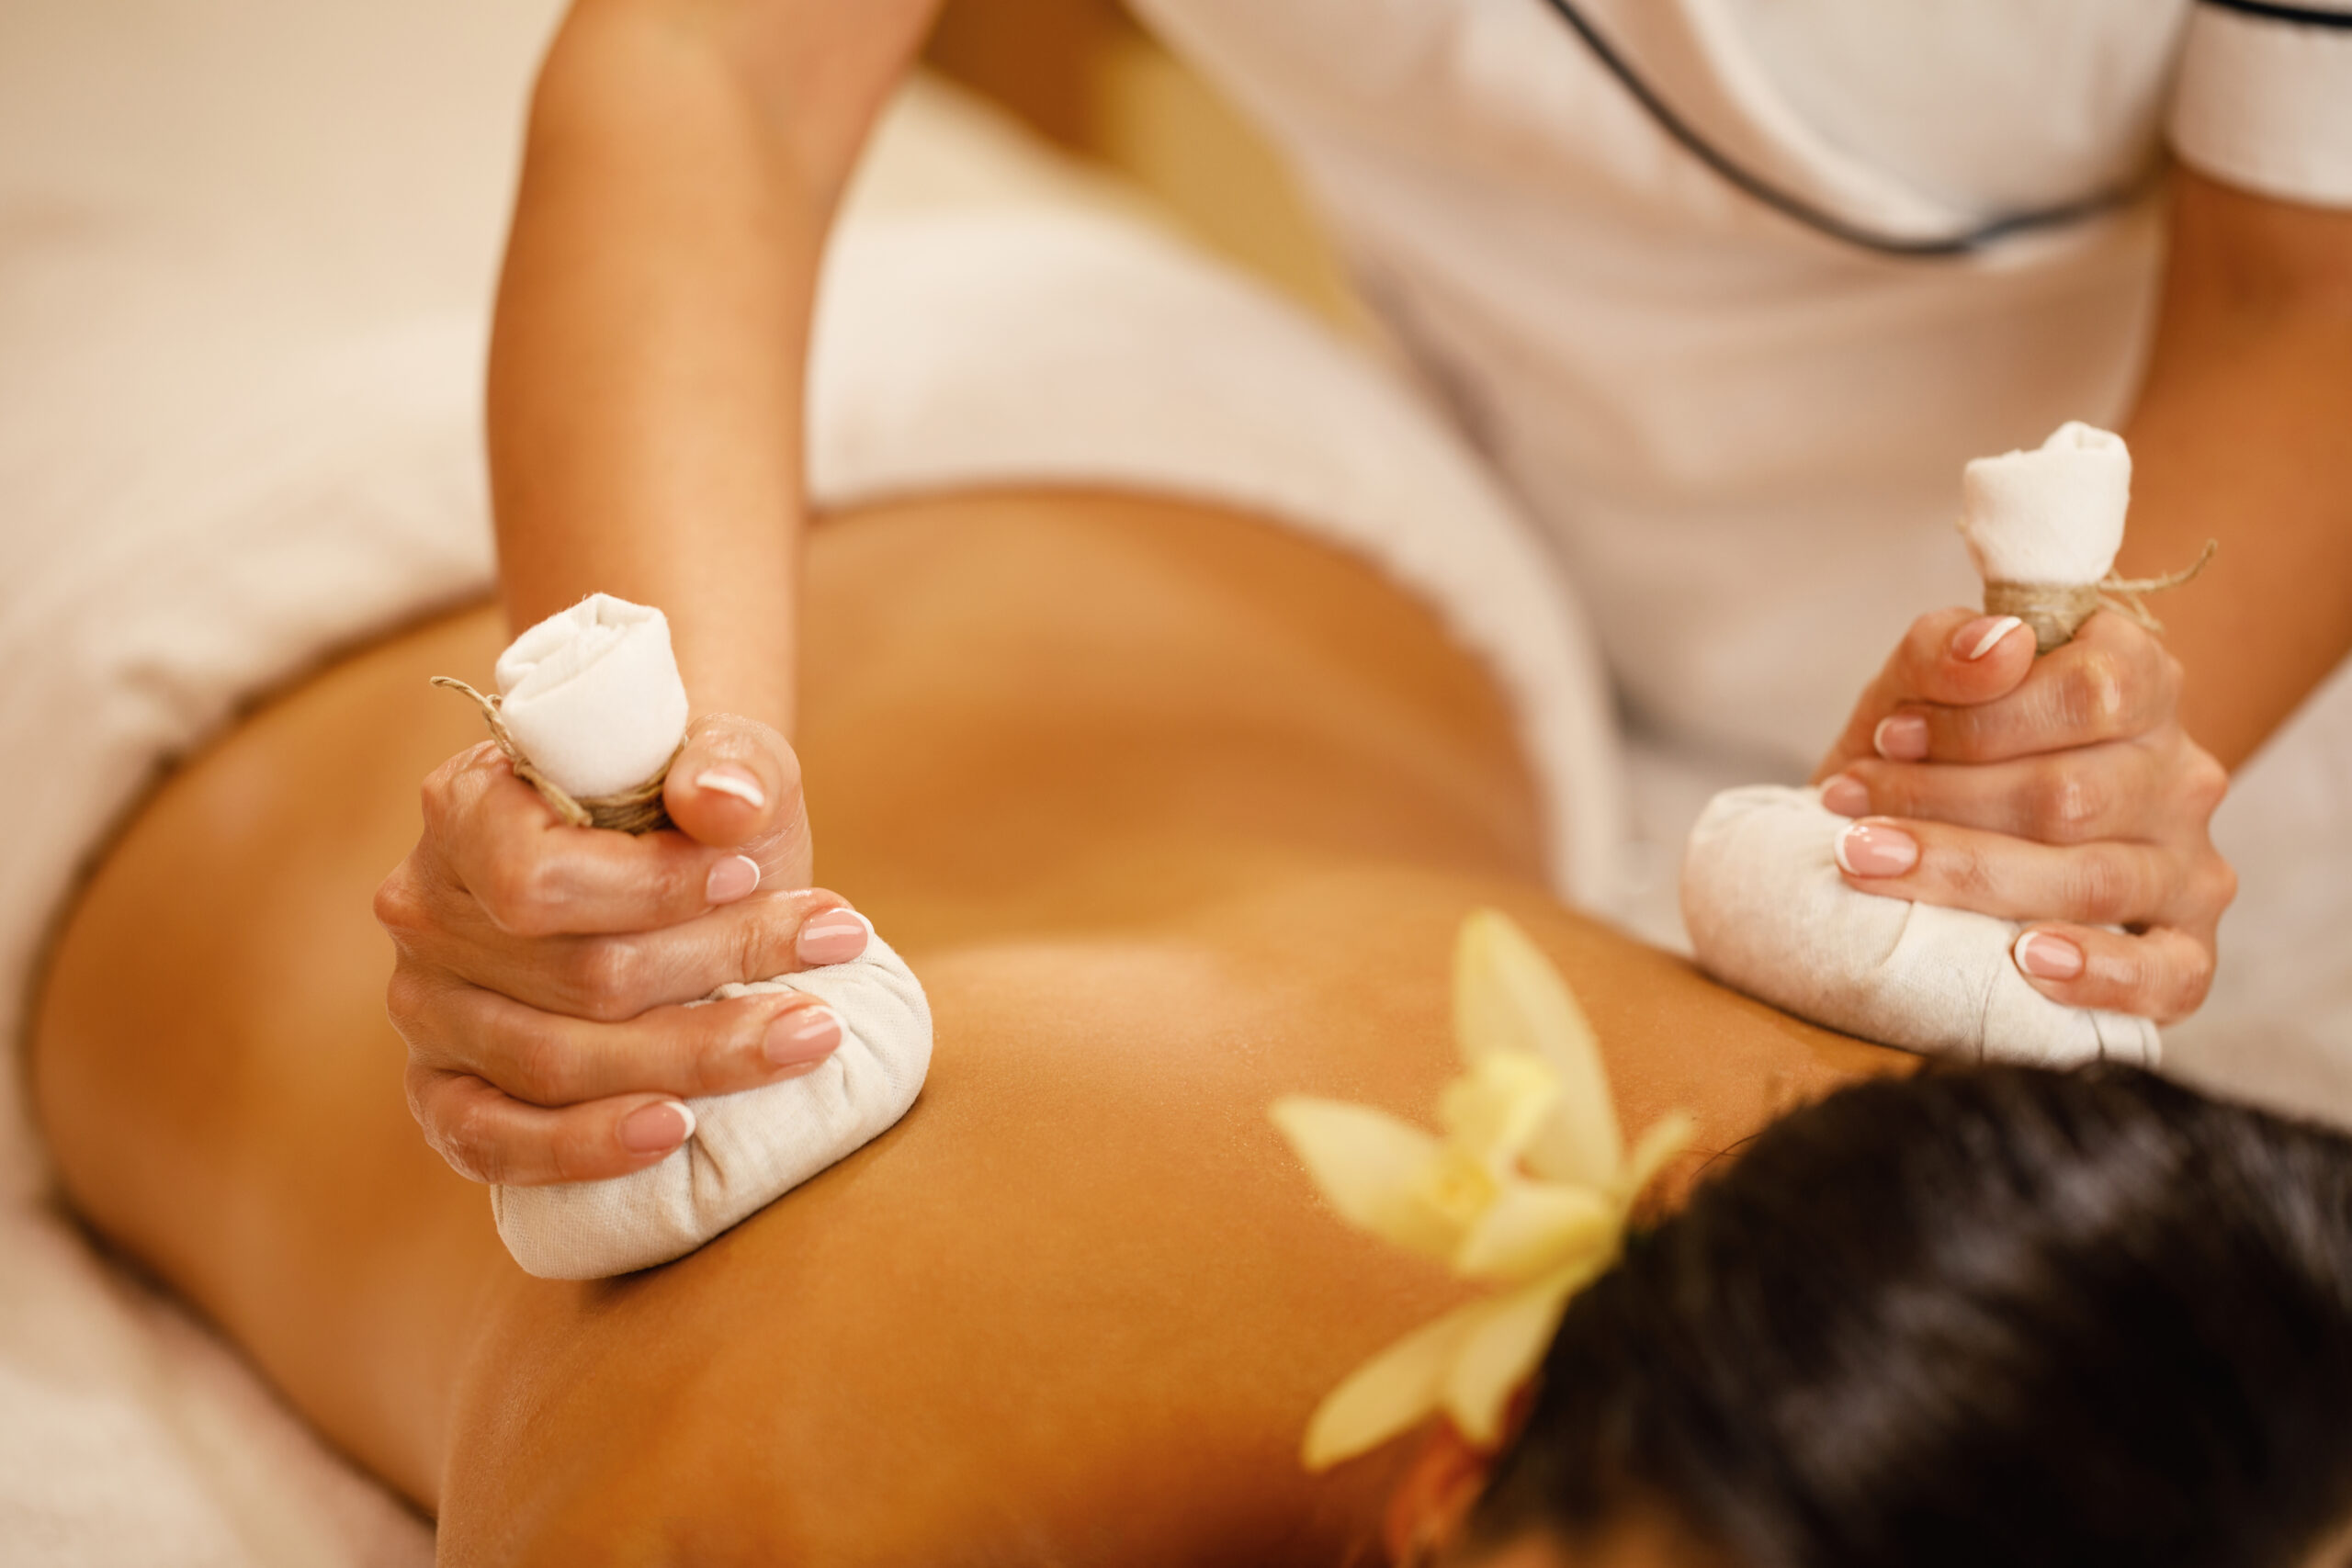 closeup-woman-getting-back-massage-with-detox-herbal-compresses-spa-salon